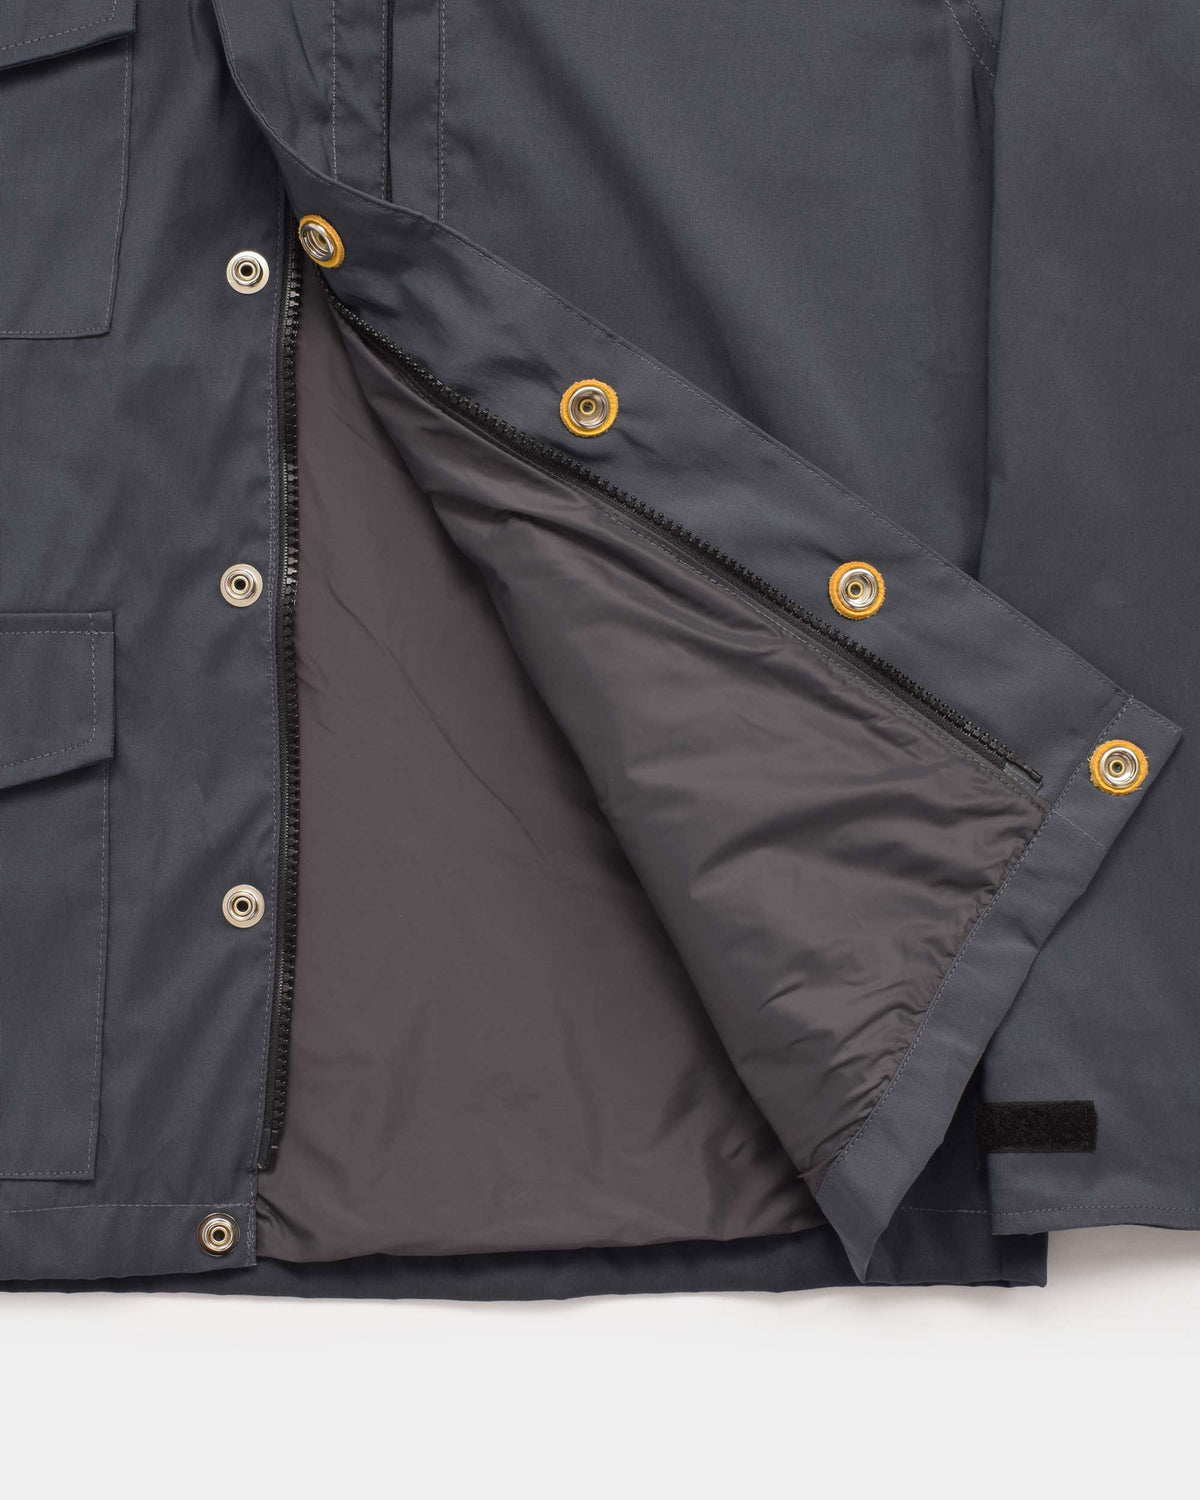 Michi Jacket in Charcoal showing the hem and lining detail